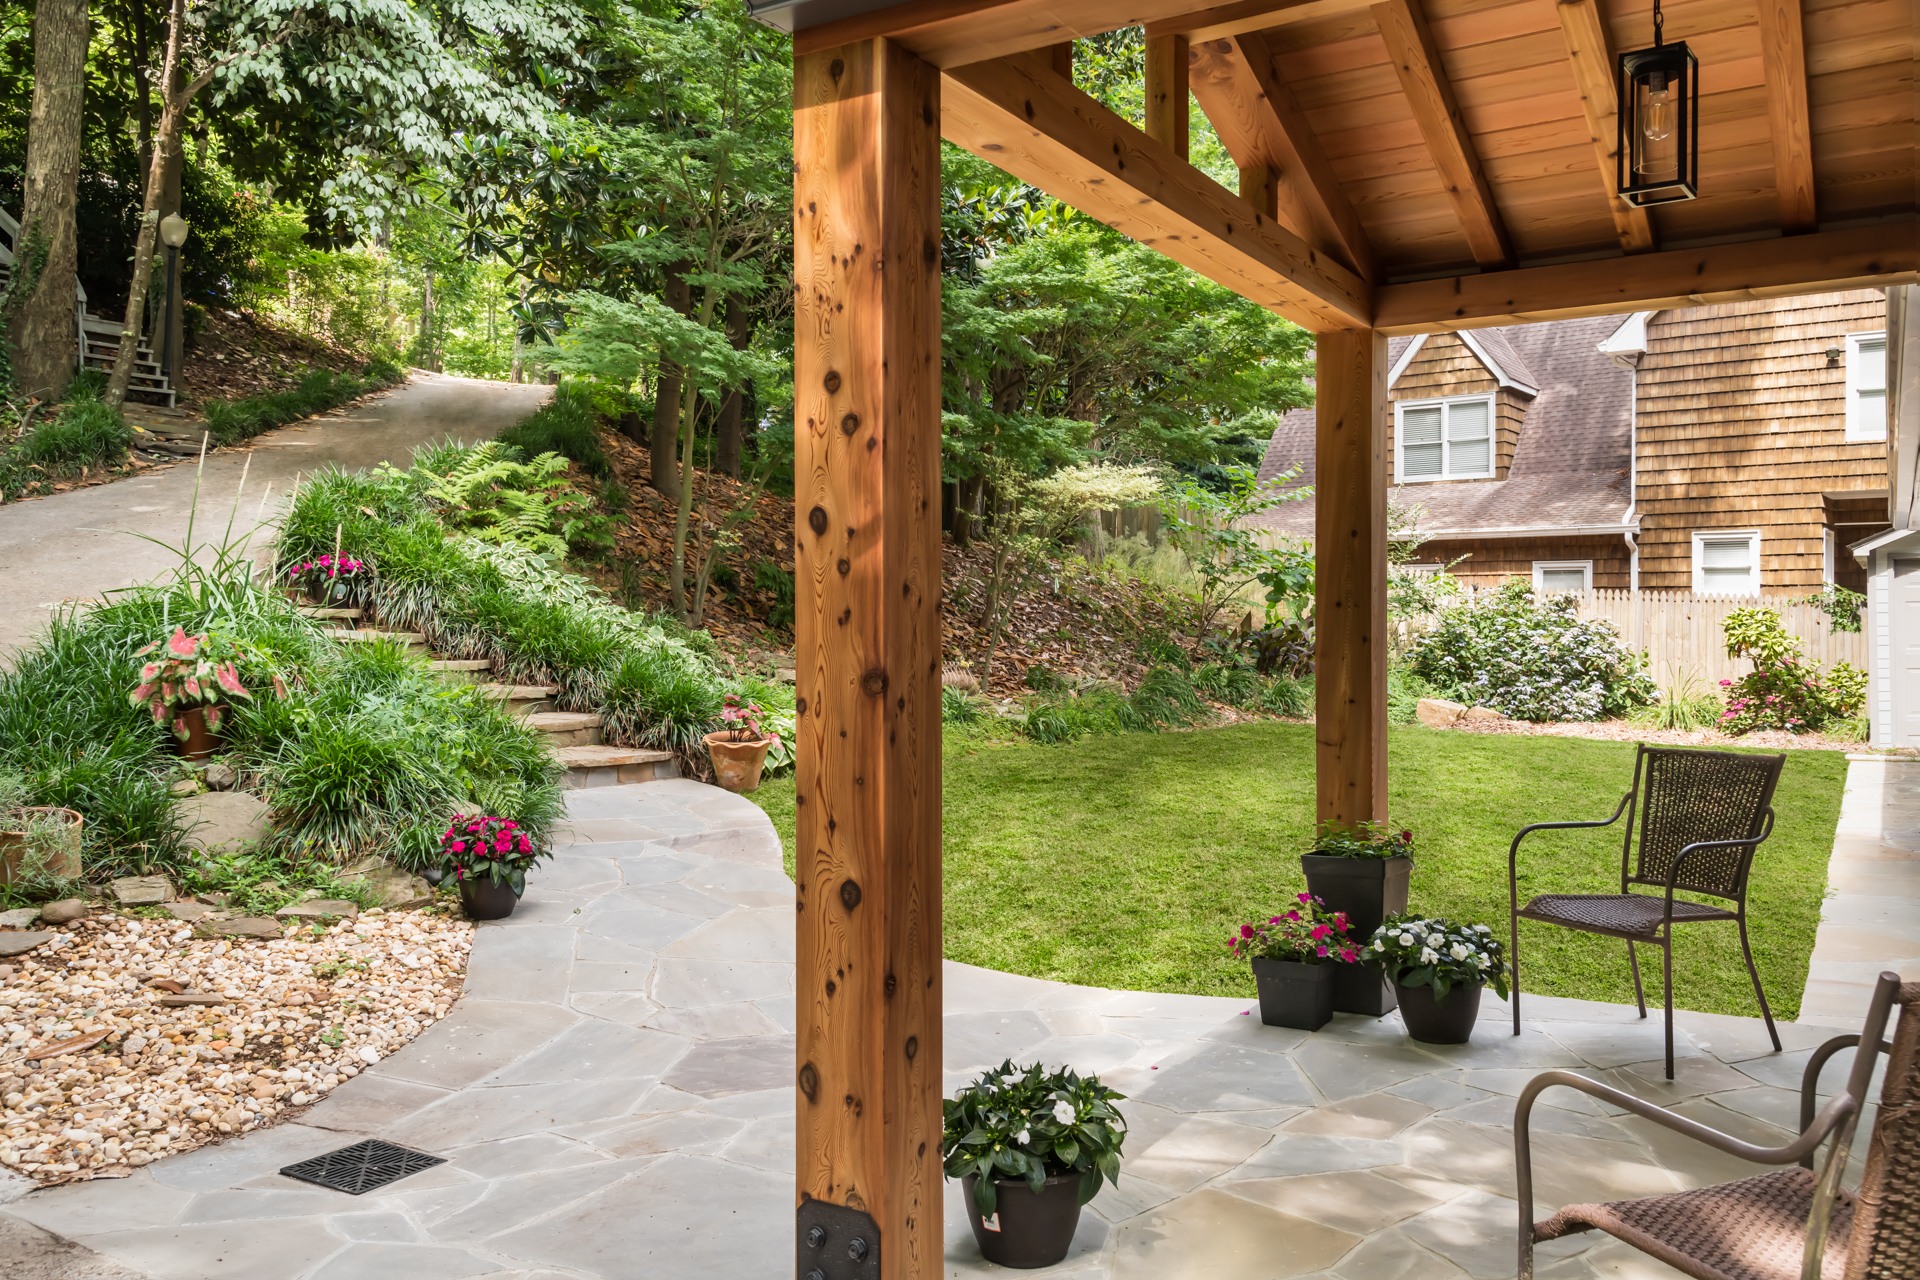 Cedar portico with winding path through landscaping